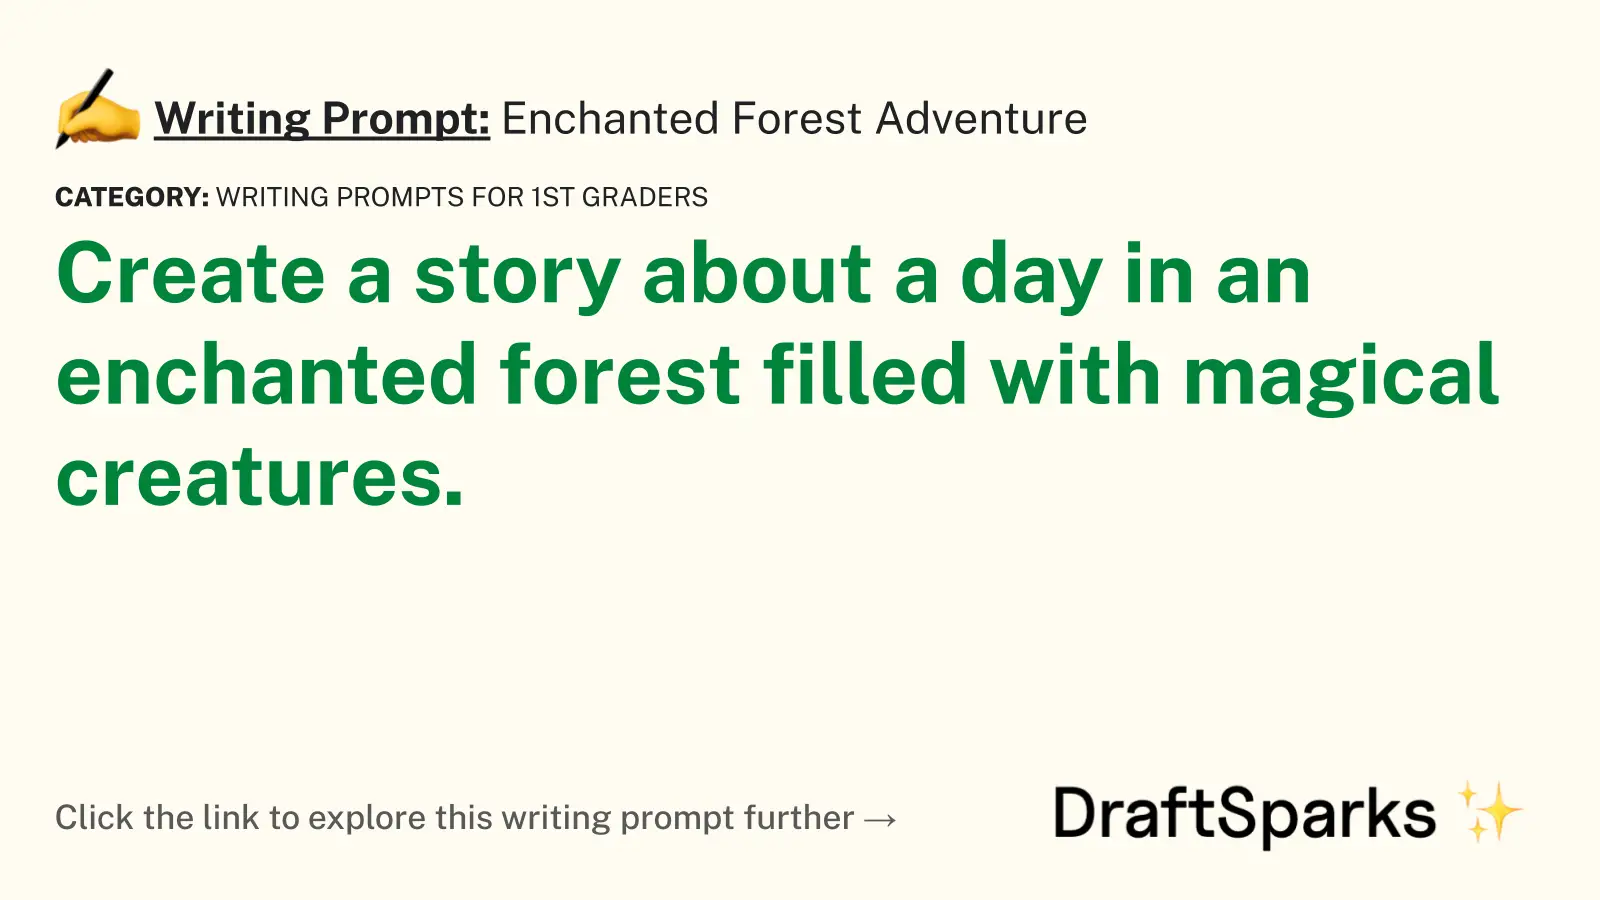 Enchanted Forest Adventure